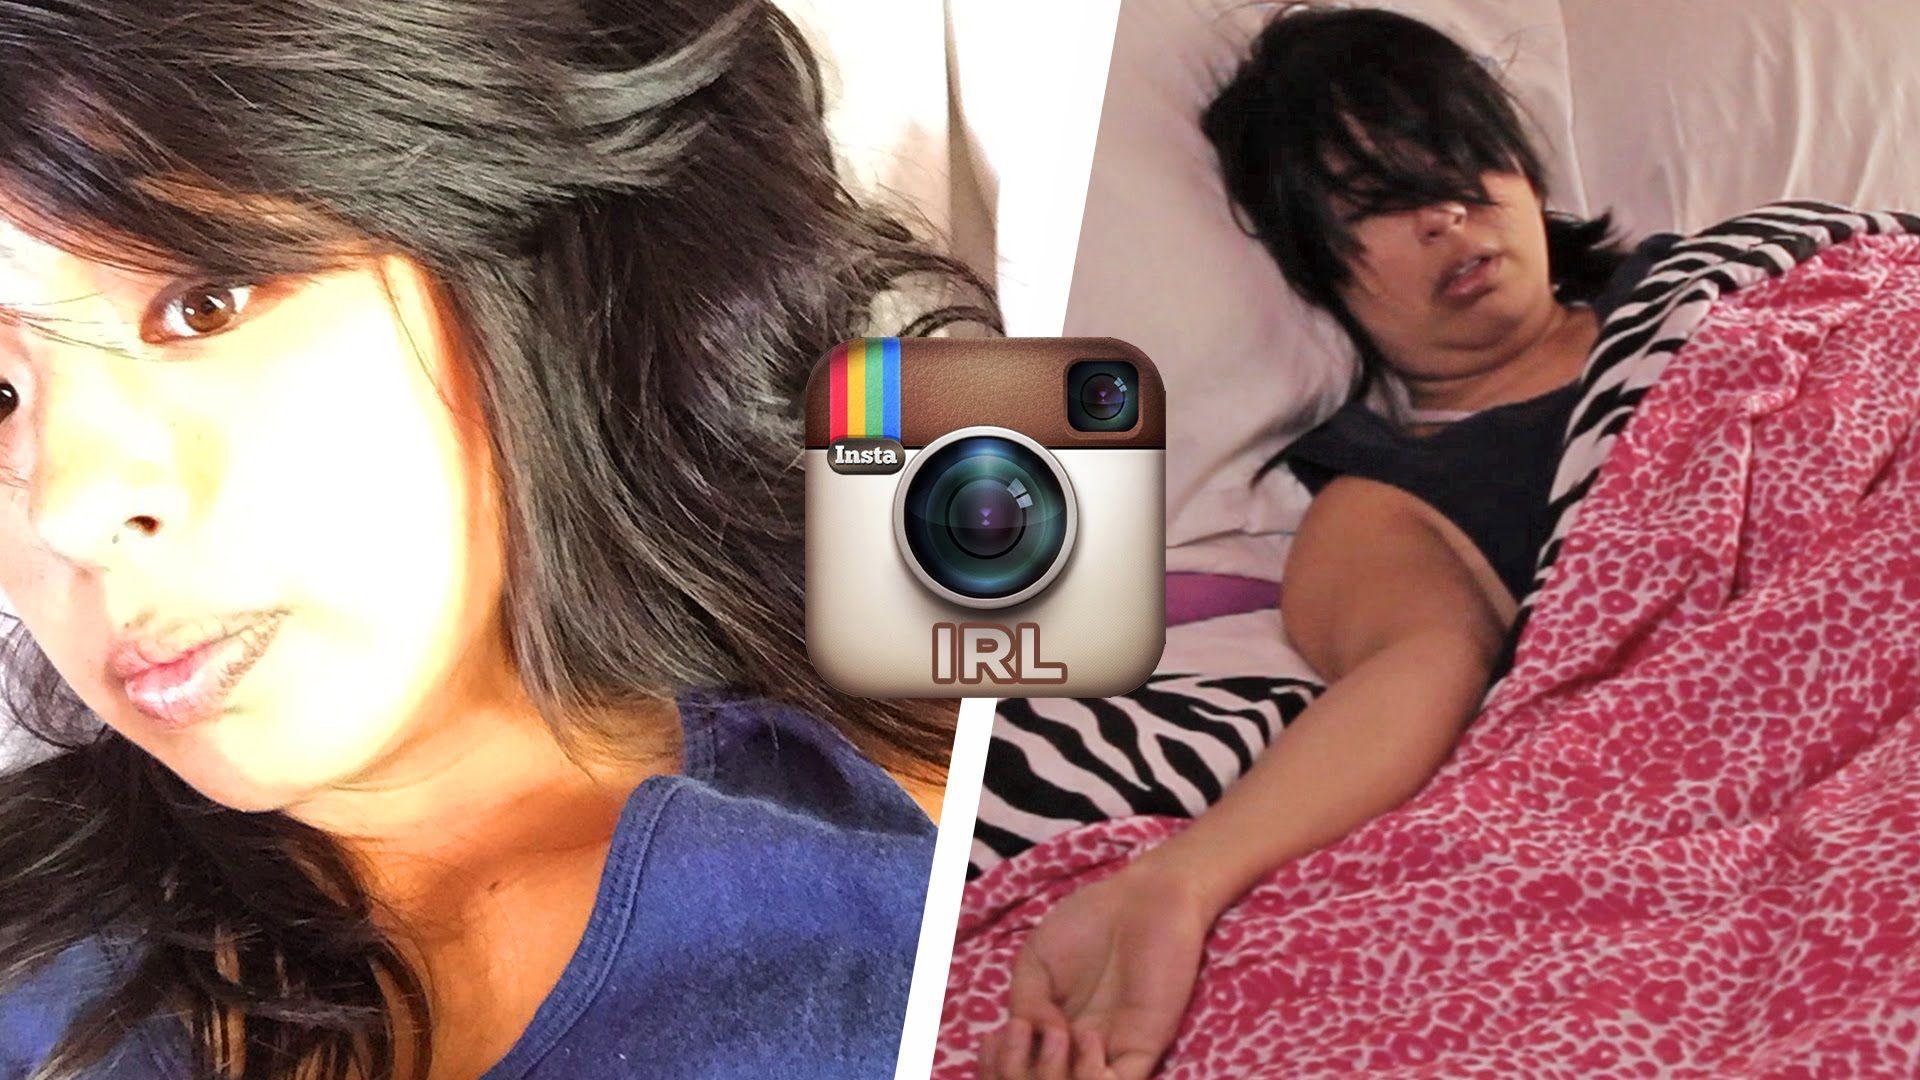 Instagram Vs. Real Life. Geek. Real life, BuzzFeed